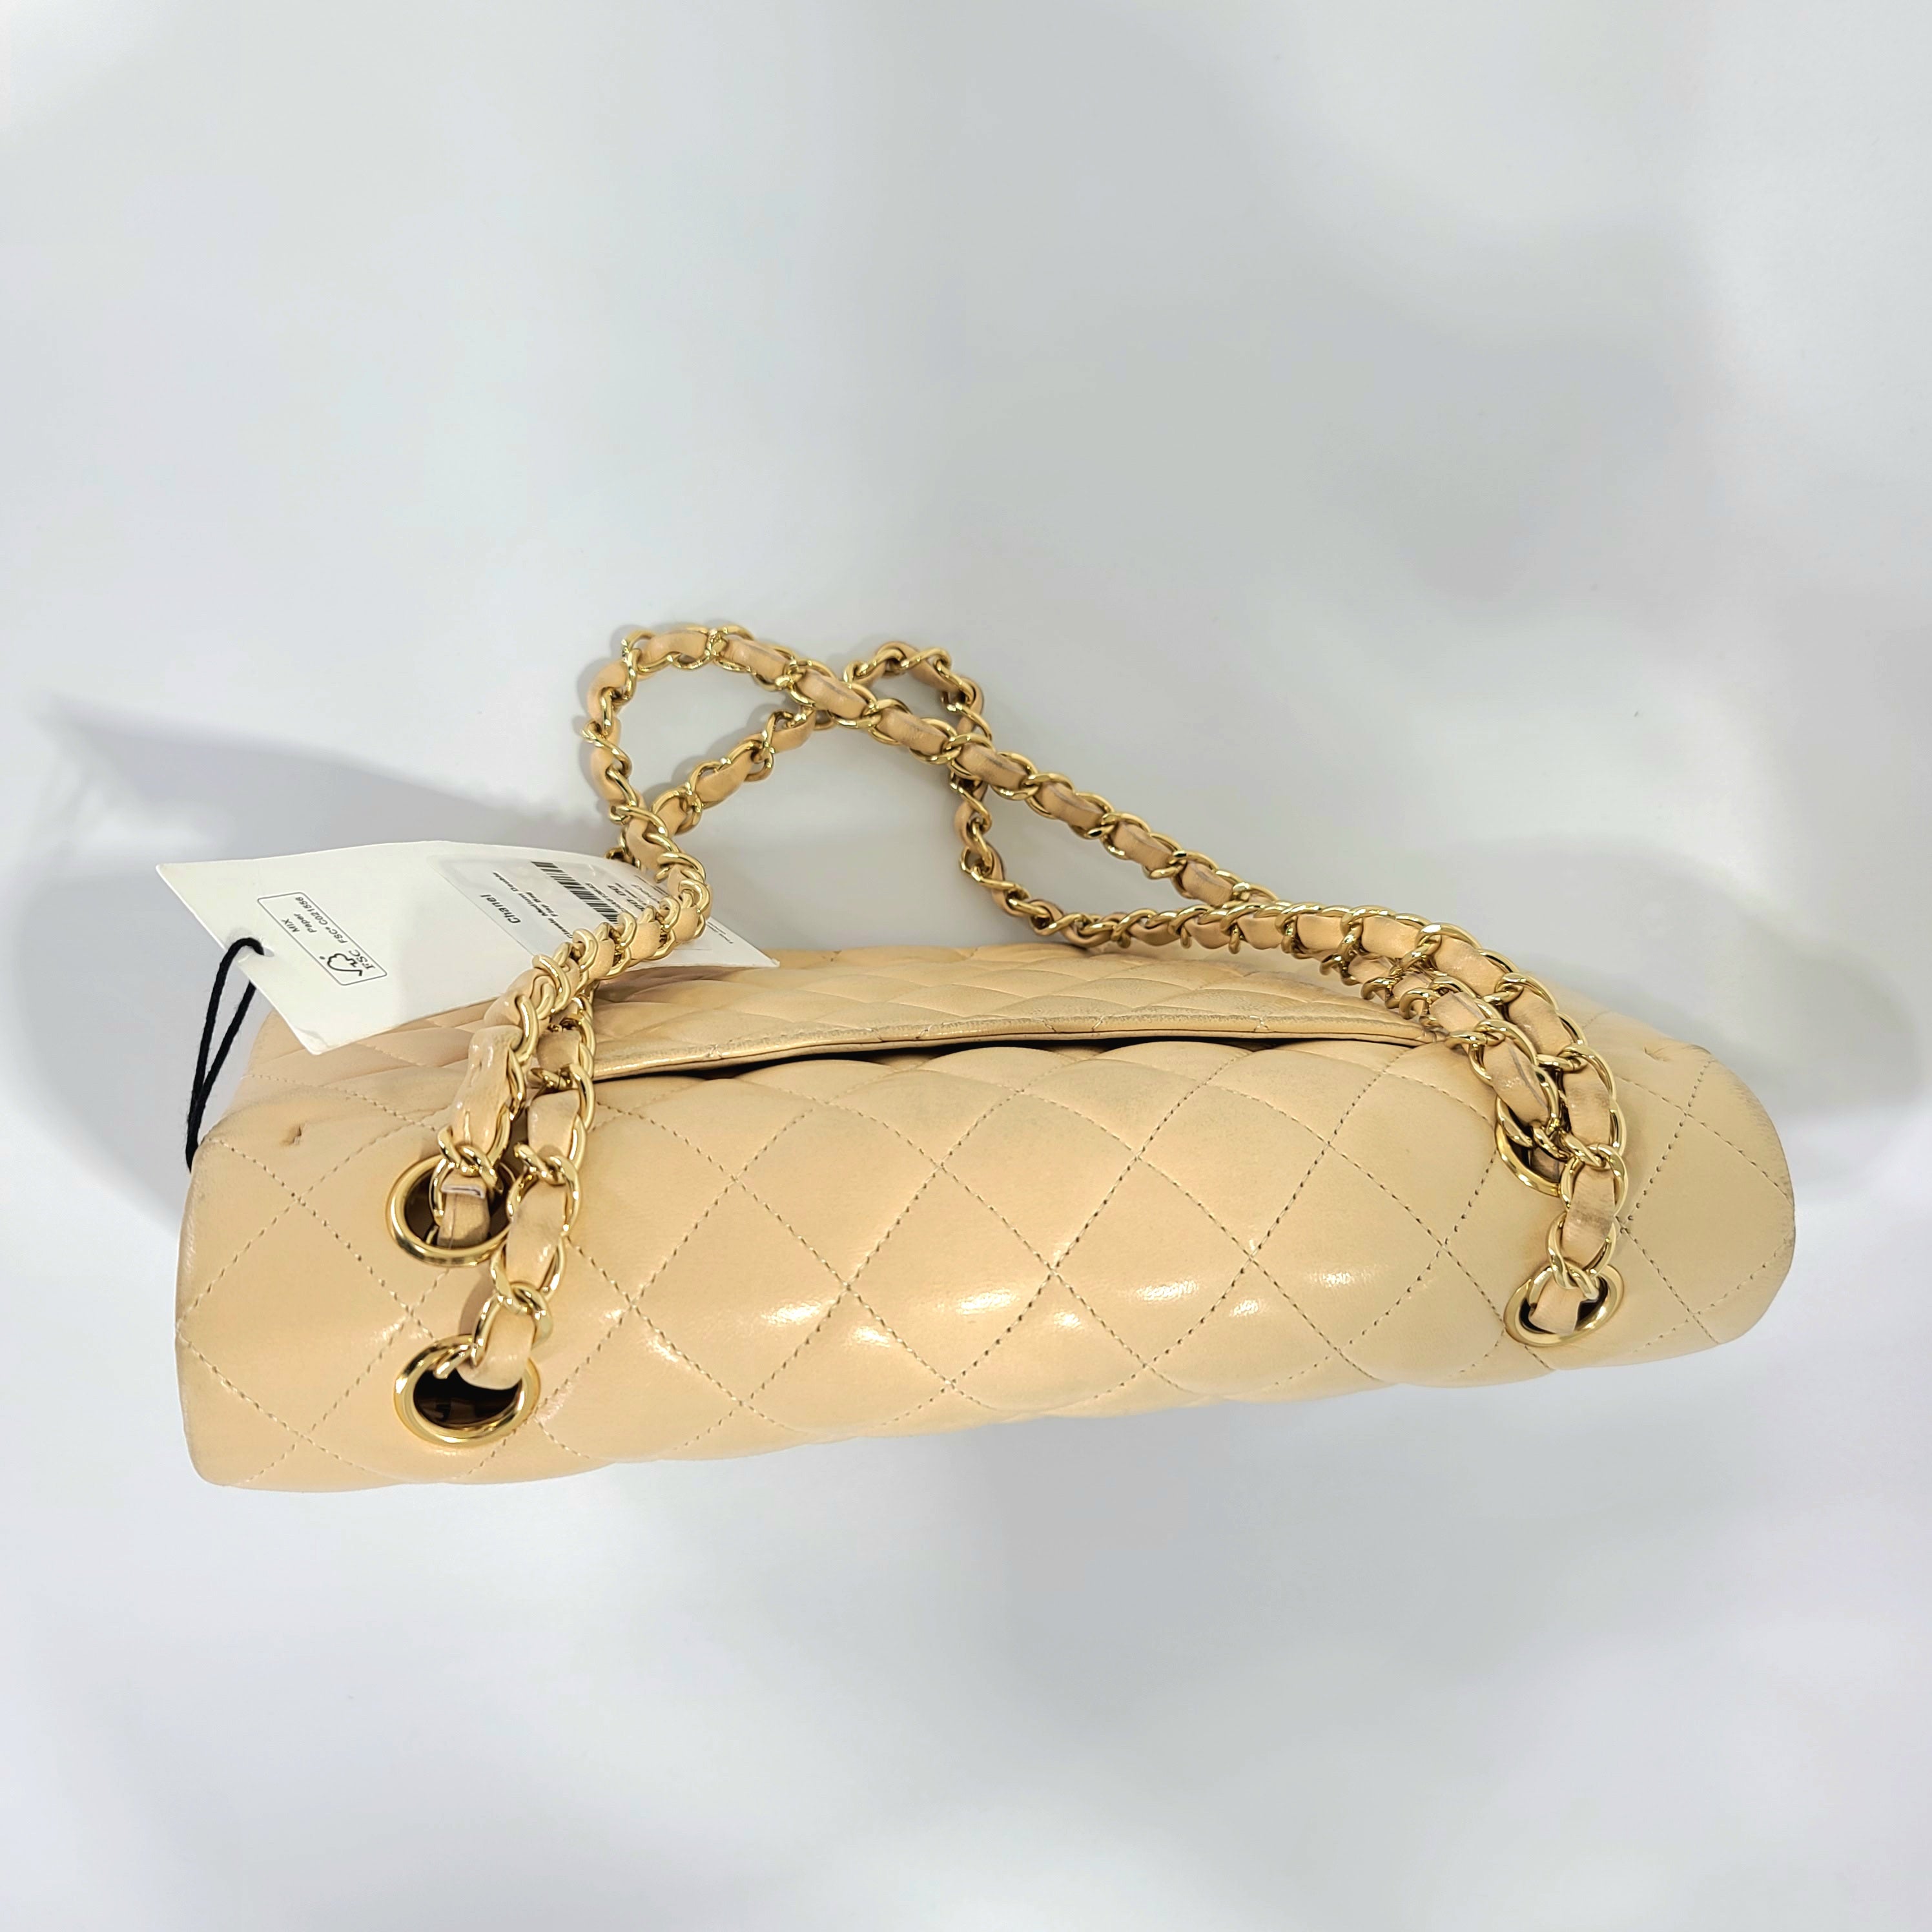 Chanel In The Mix Shoulder Bags for Women